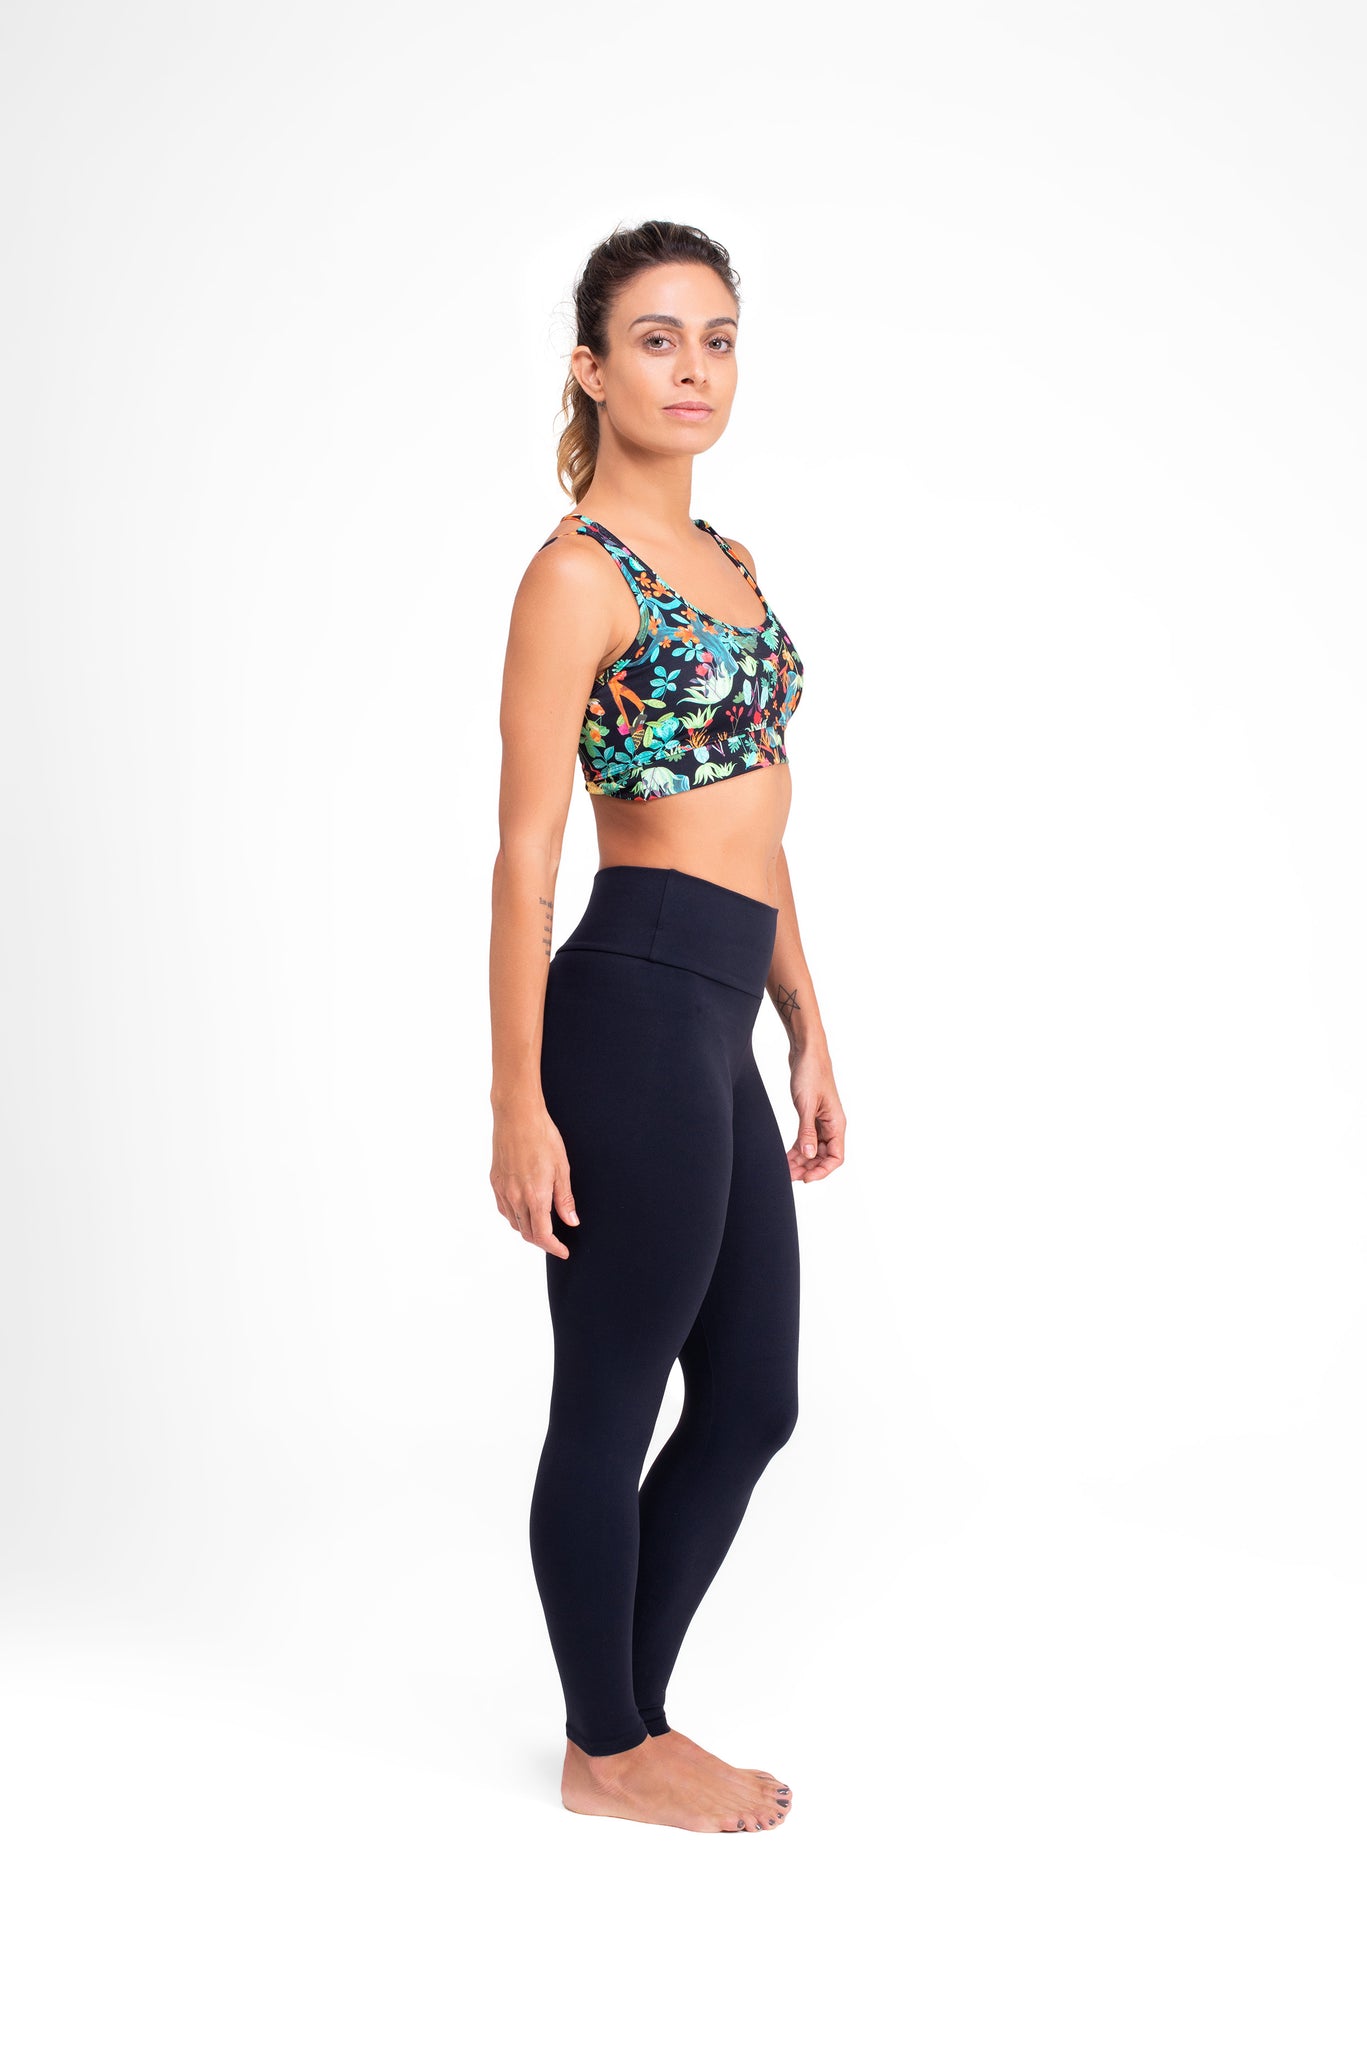 Mid-rise Leggings Abstract All Over Print - FlowState Energy Speed Legging